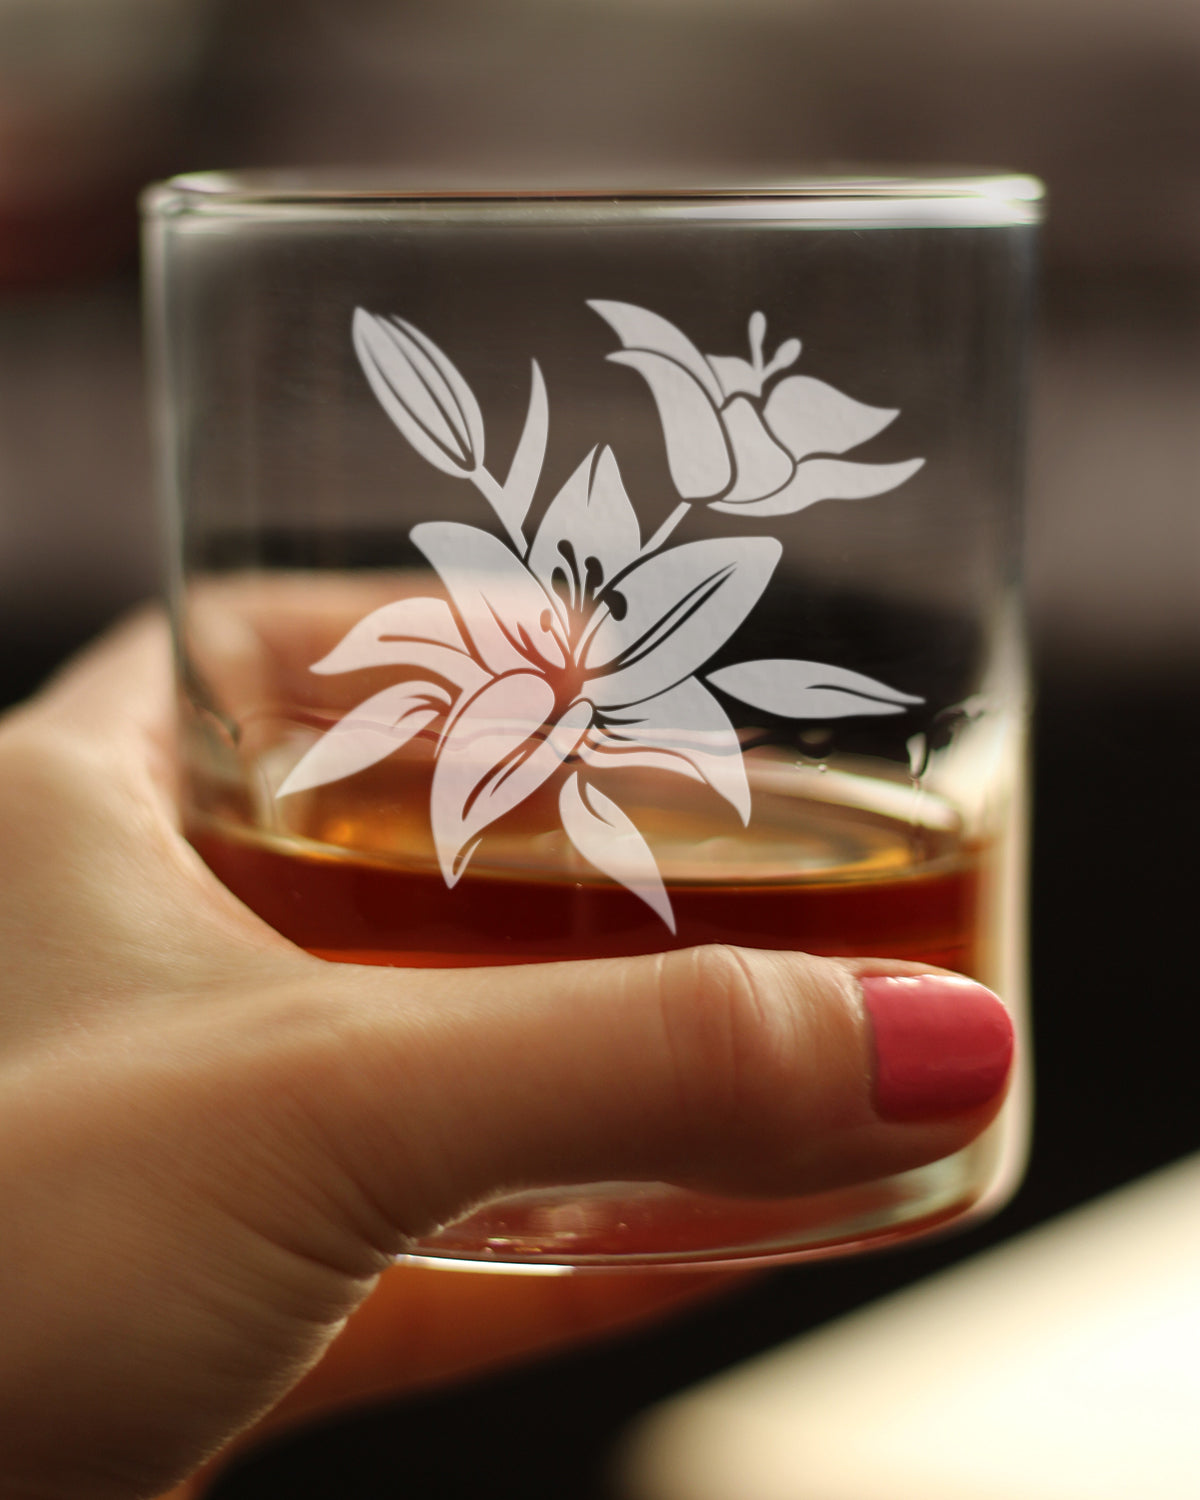 Lily Whiskey Rocks Glass - Floral Themed Decor and Gifts for Flower Lovers - 10.25 Oz Glasses